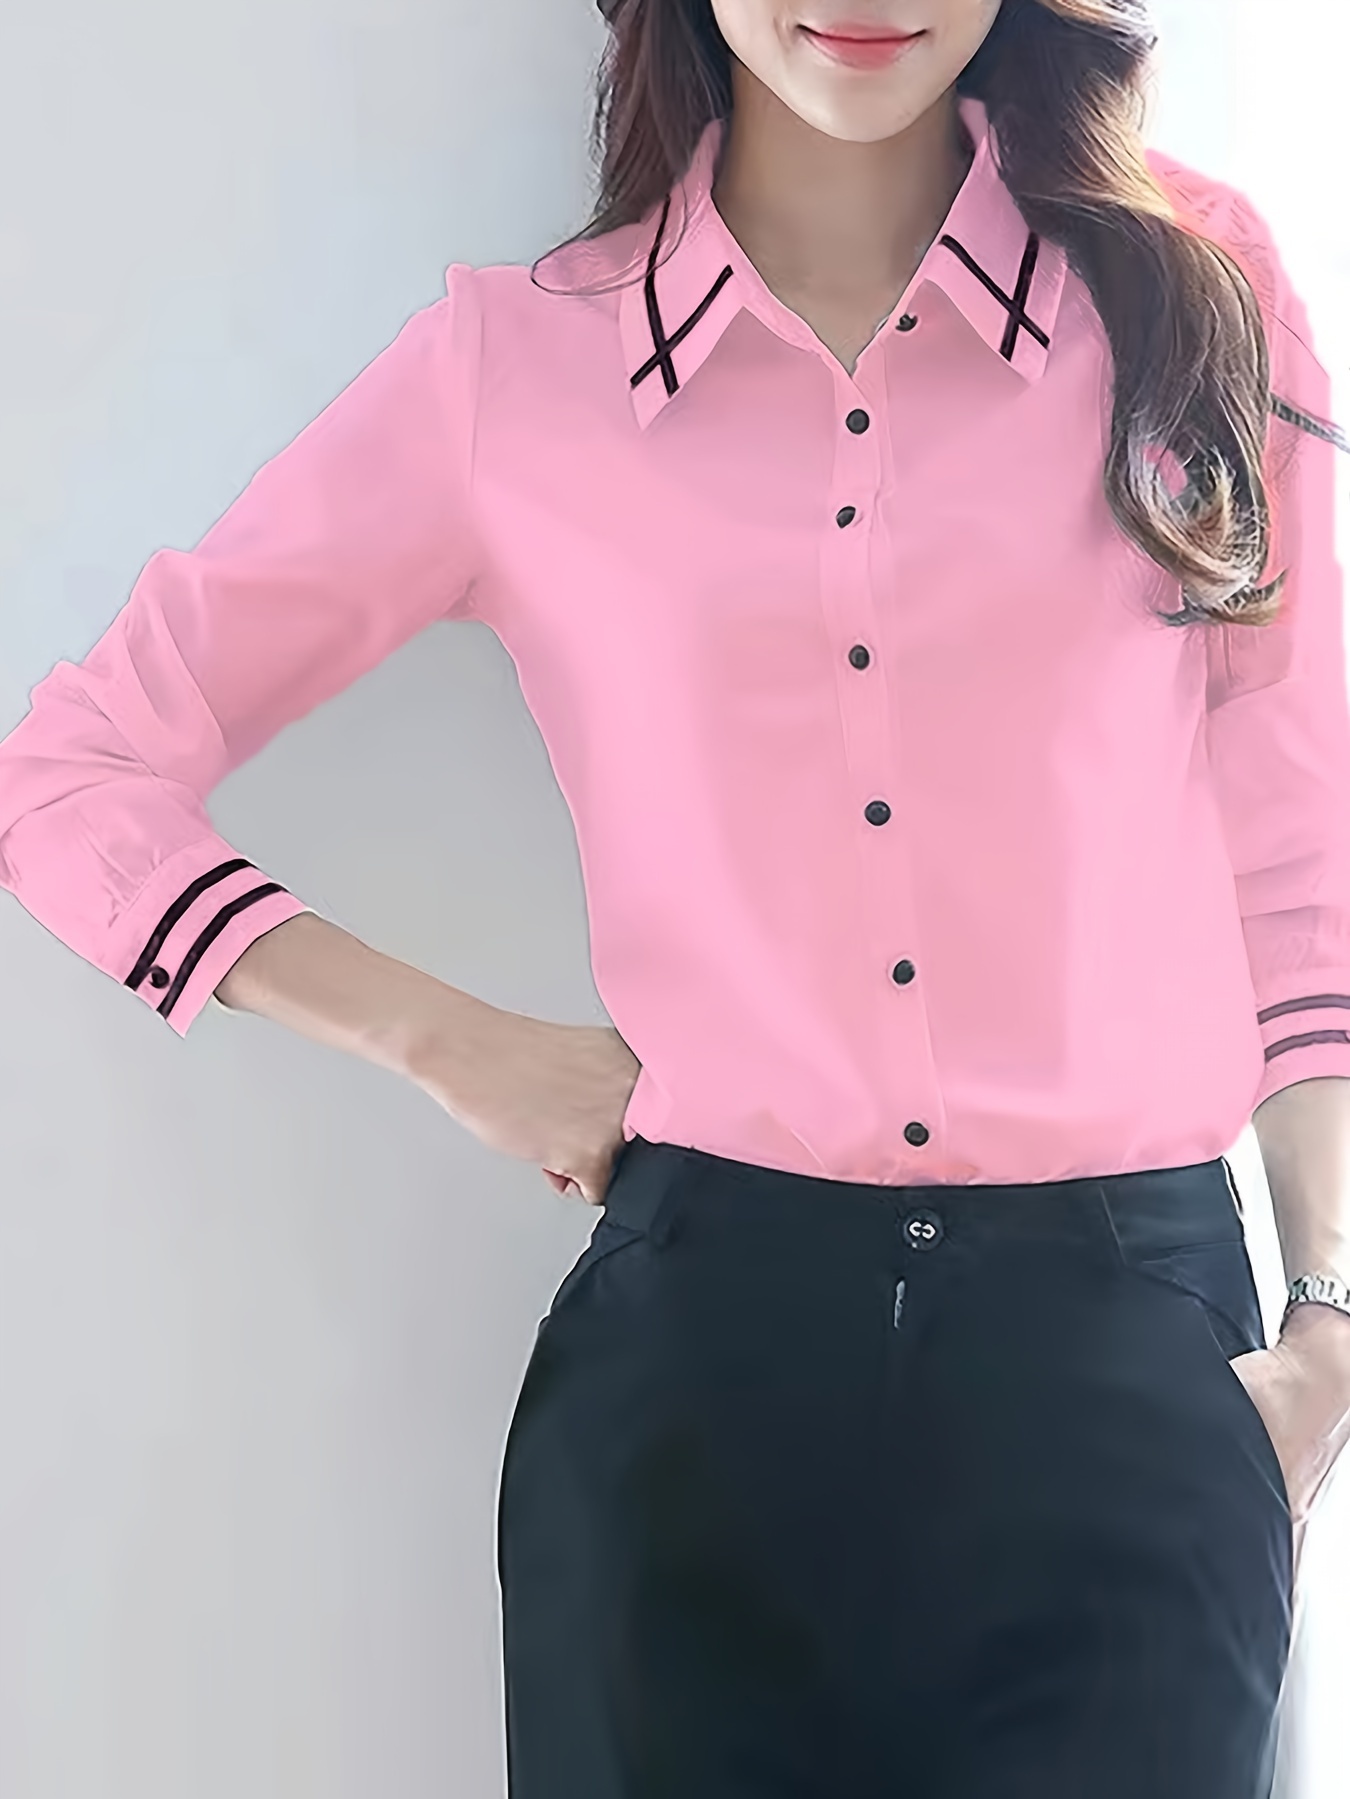 contrast trim button front shirt casual long sleeve shirt for spring fall womens clothing details 12